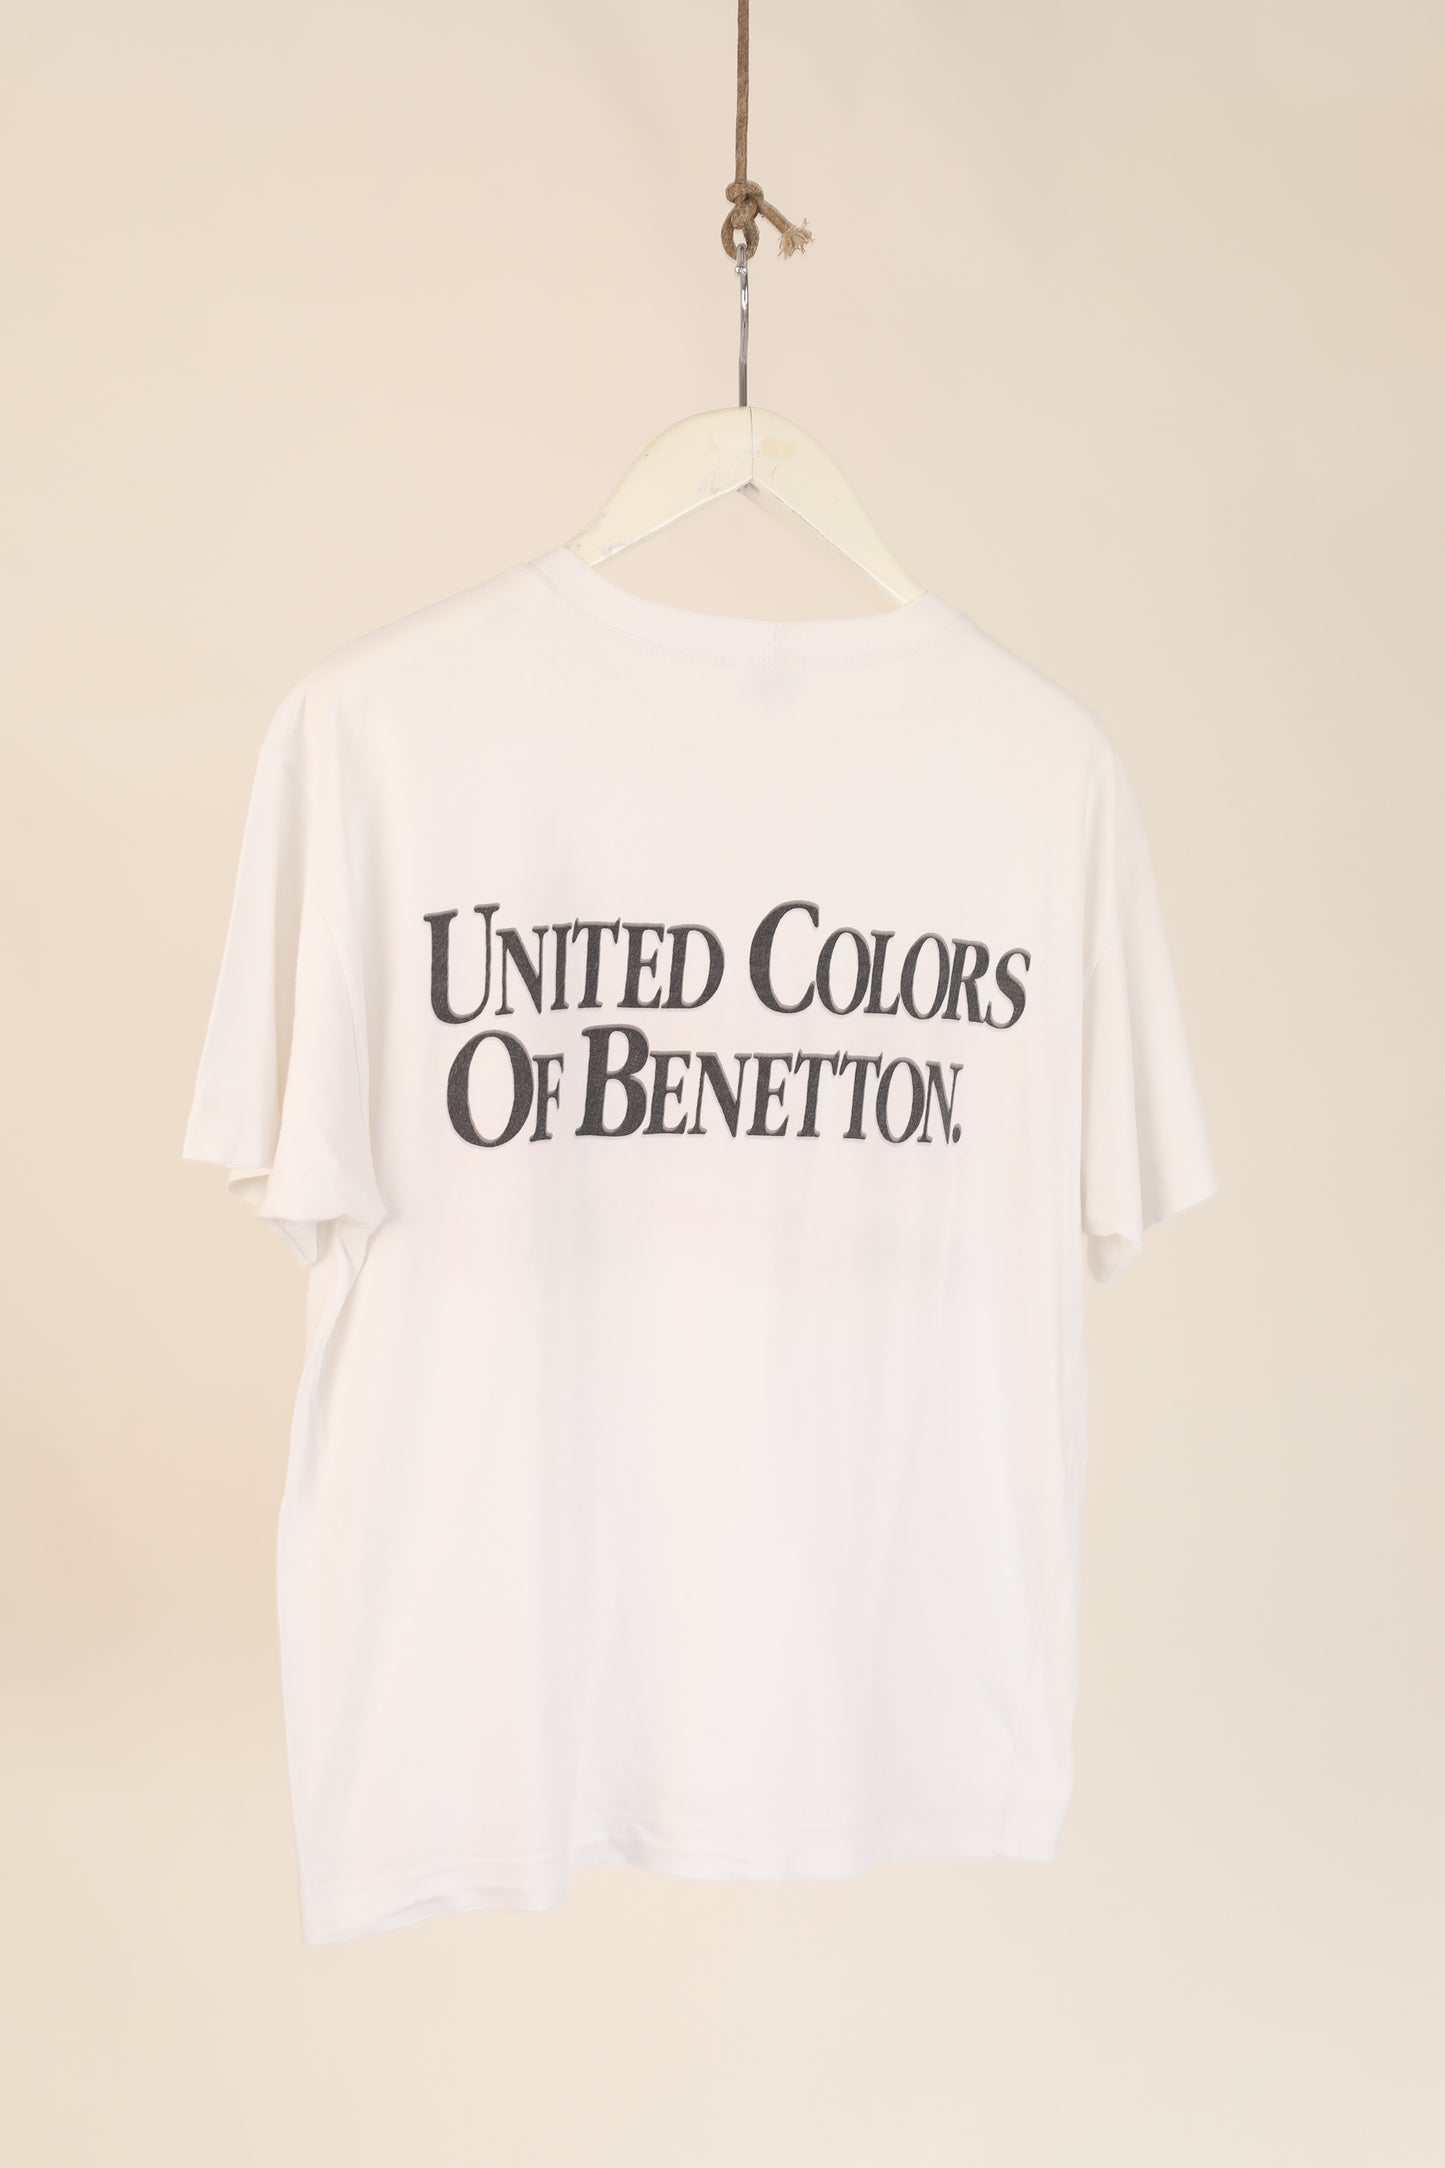 United Colors of Benetton Flag T-Shirt